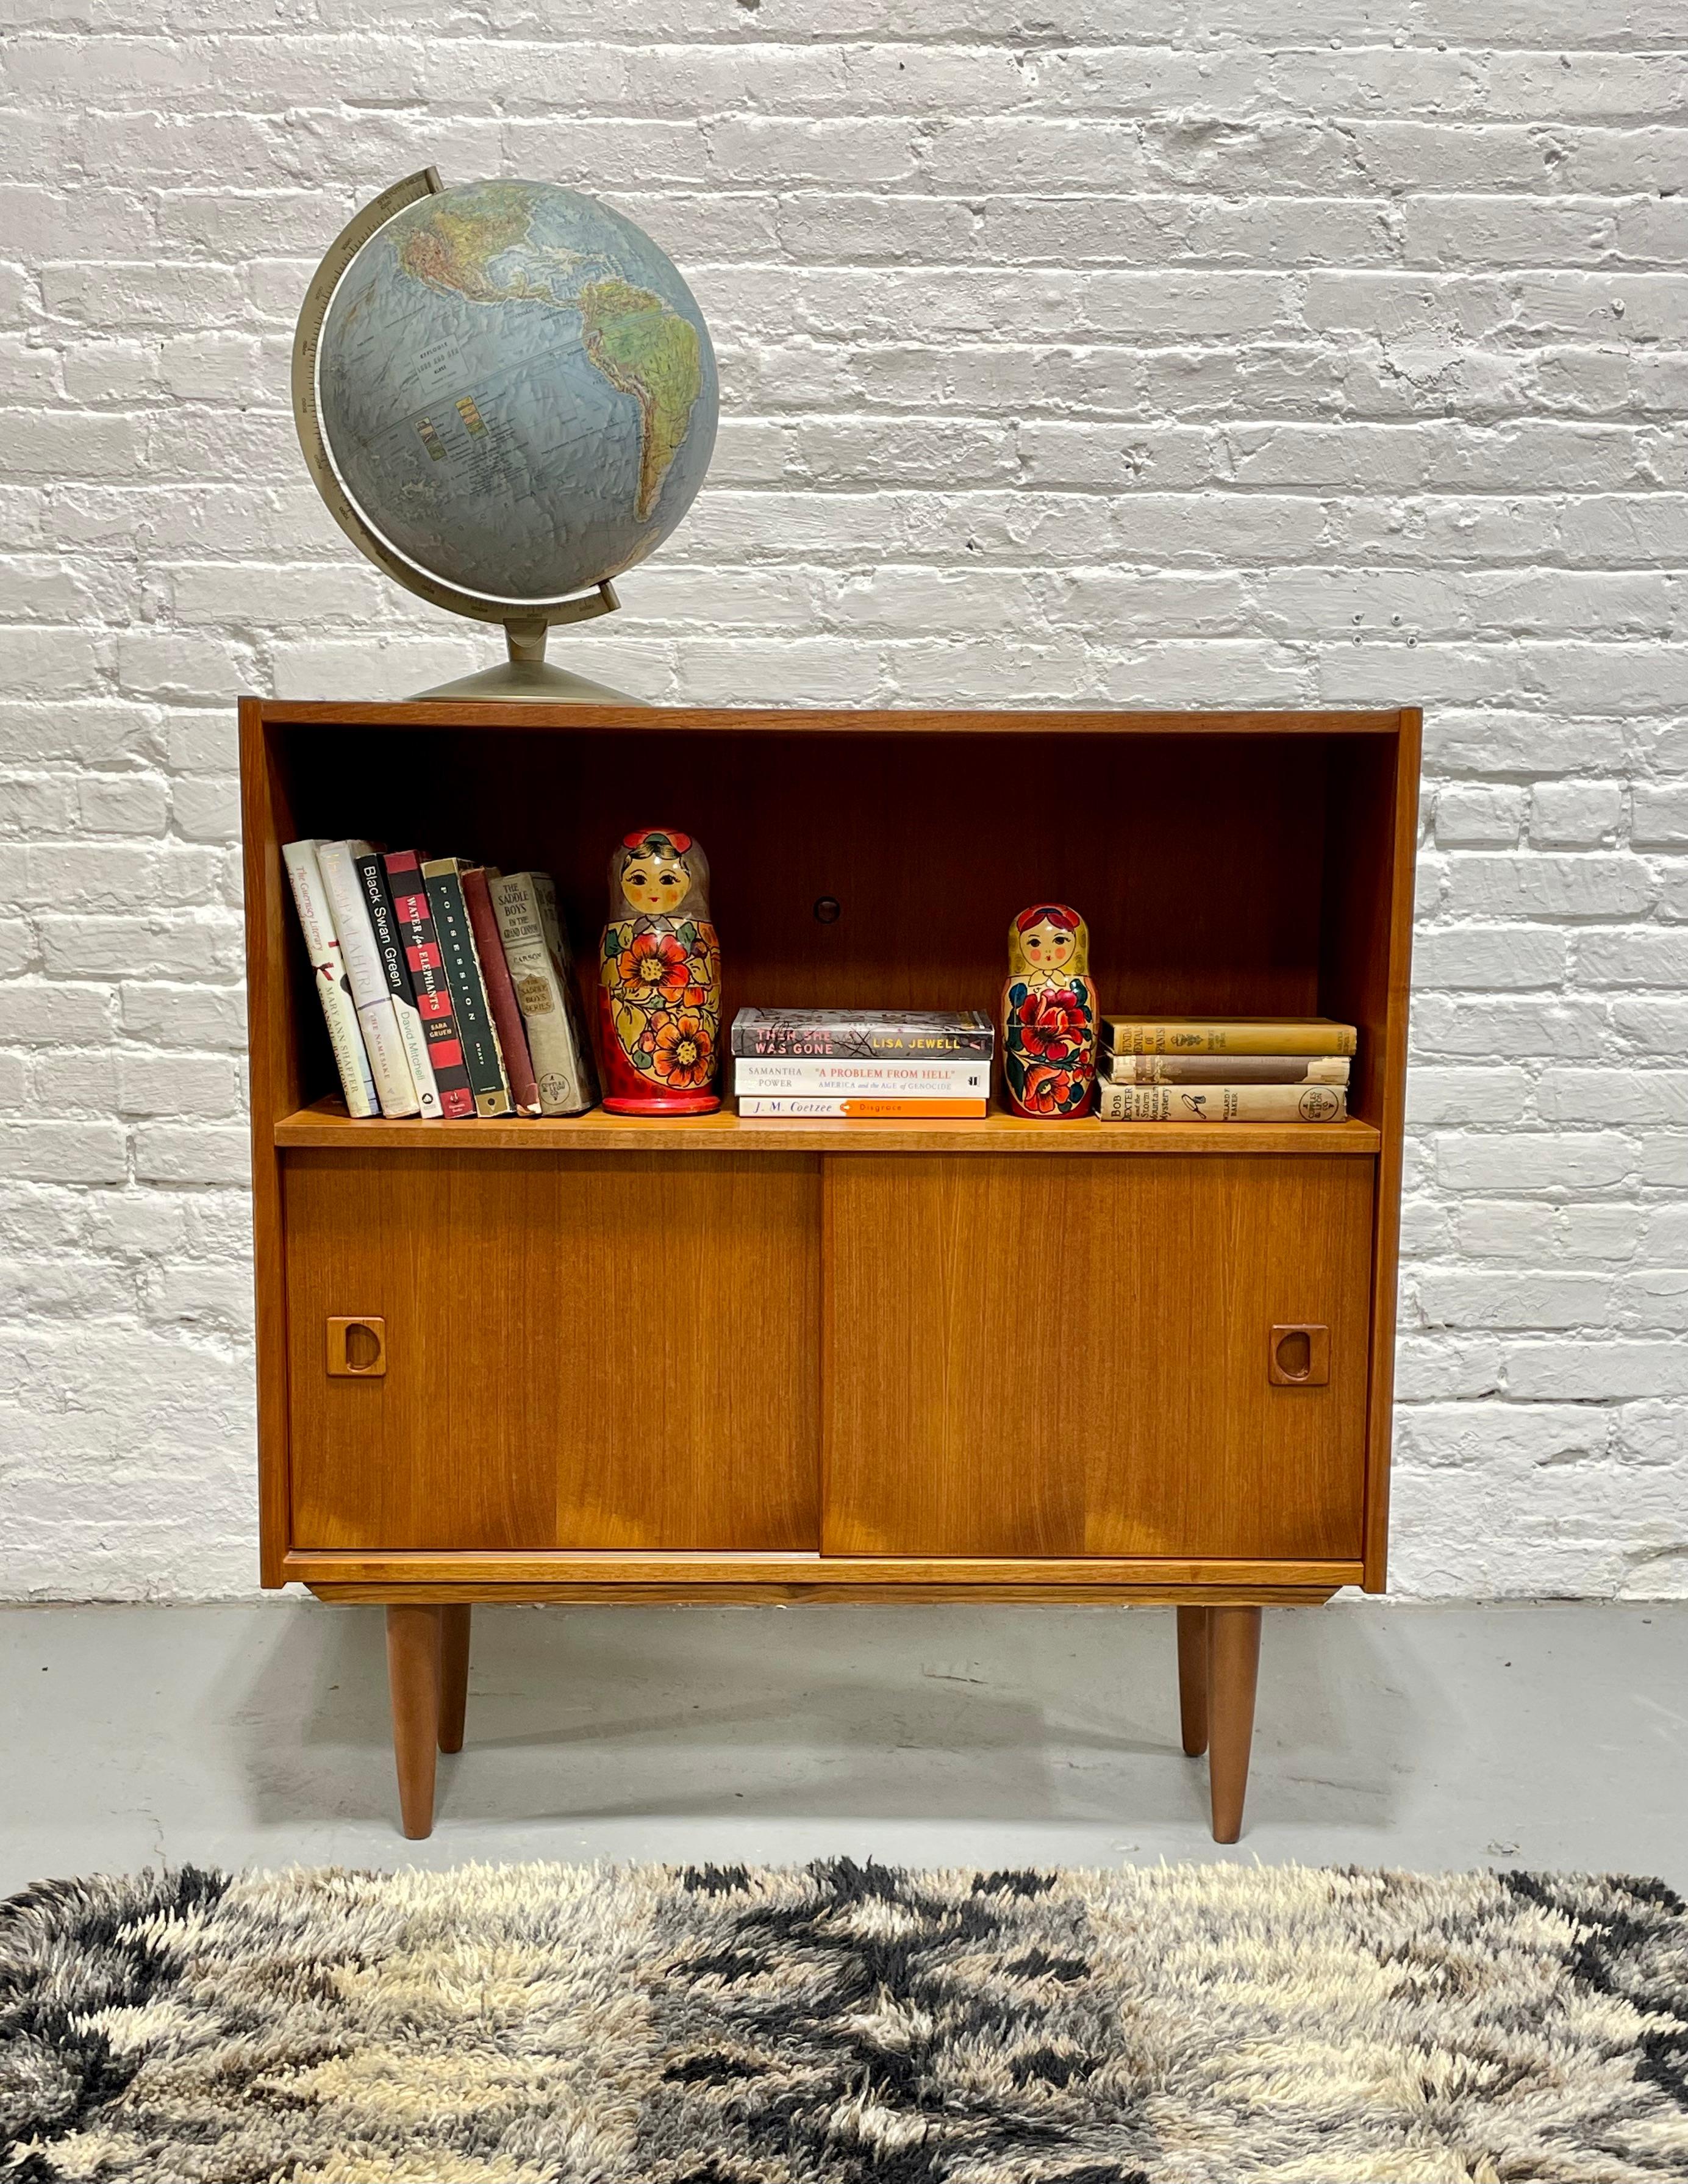 Danish Mid Century Modern Teak Bookcase, c. 1960’s.  Great combination of exposed storage in the upper area - perfect for books and collectables across the top shelf and an adjustable shelf in the lower area for additional storage.  This piece would